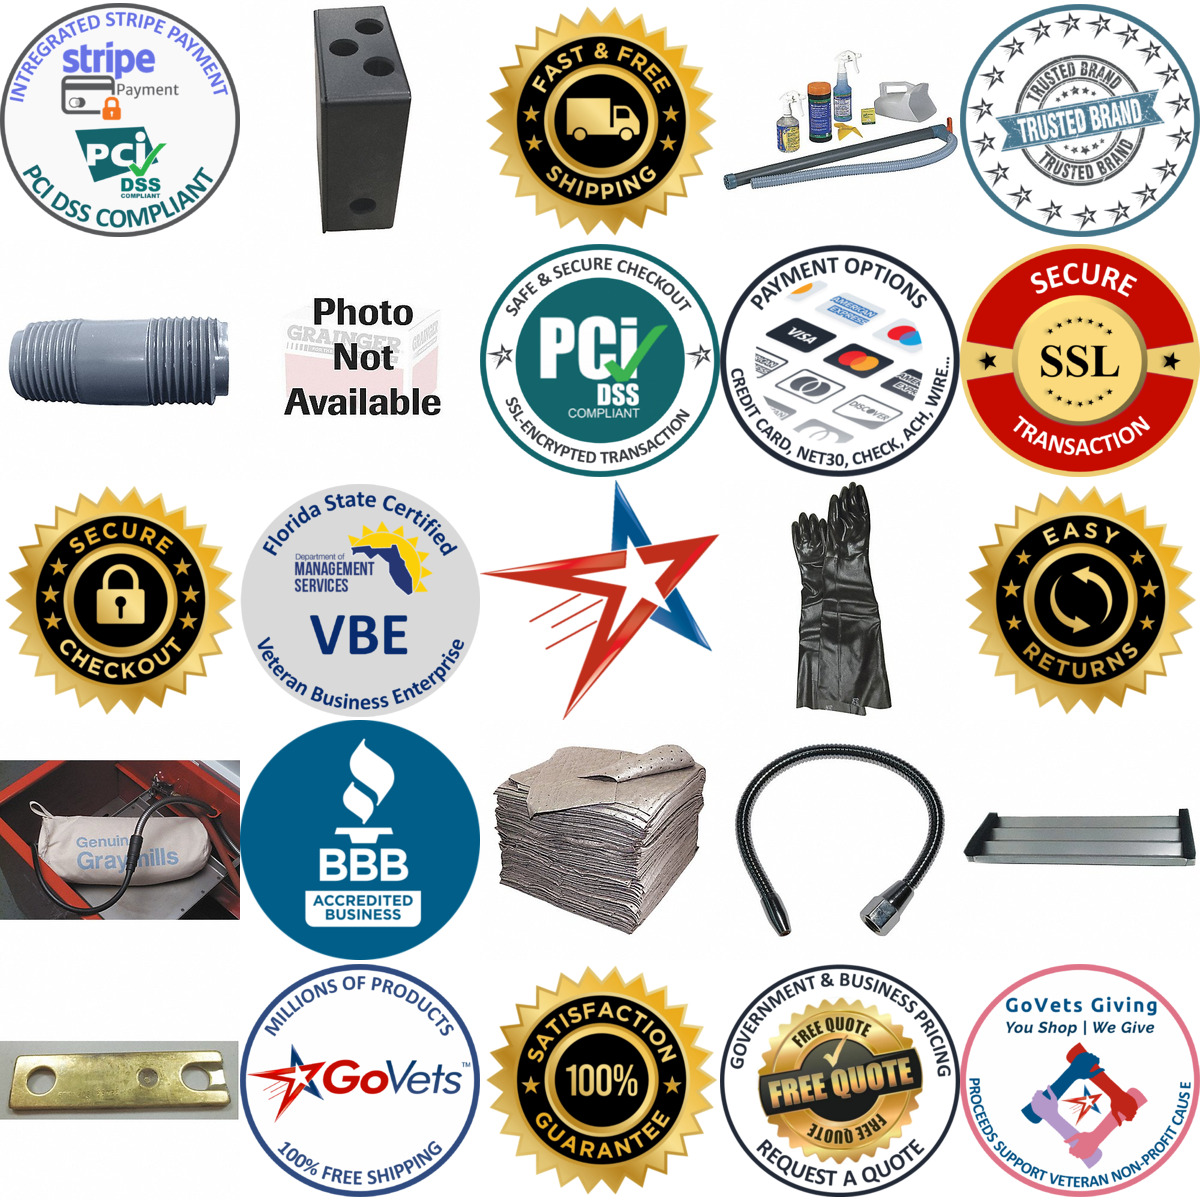 A selection of Parts Washer Accessories and Replacement Parts products on GoVets